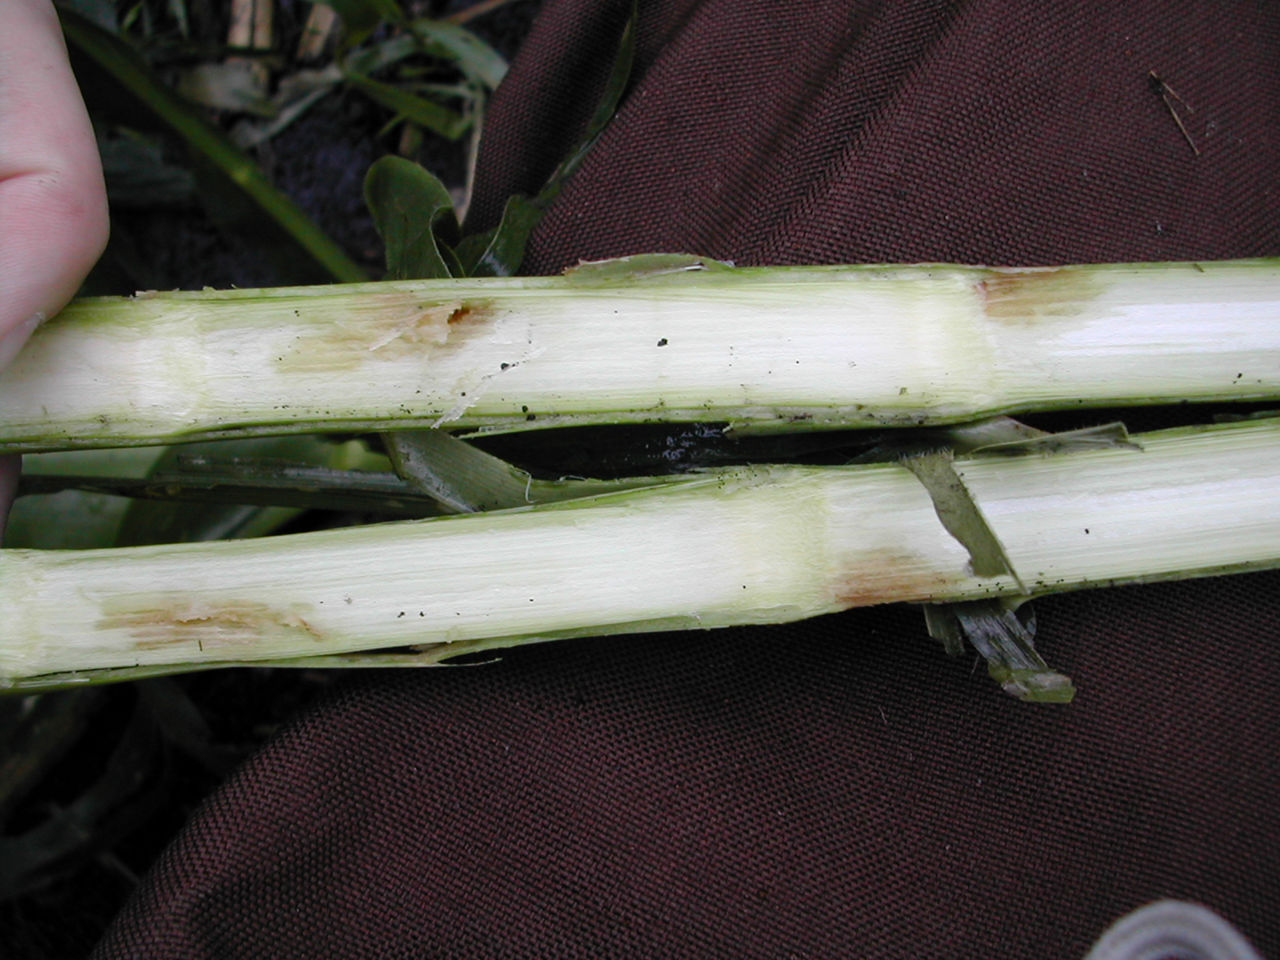 Figure 4. Pith showing discoloration resulting from hail stone hits on the stalk